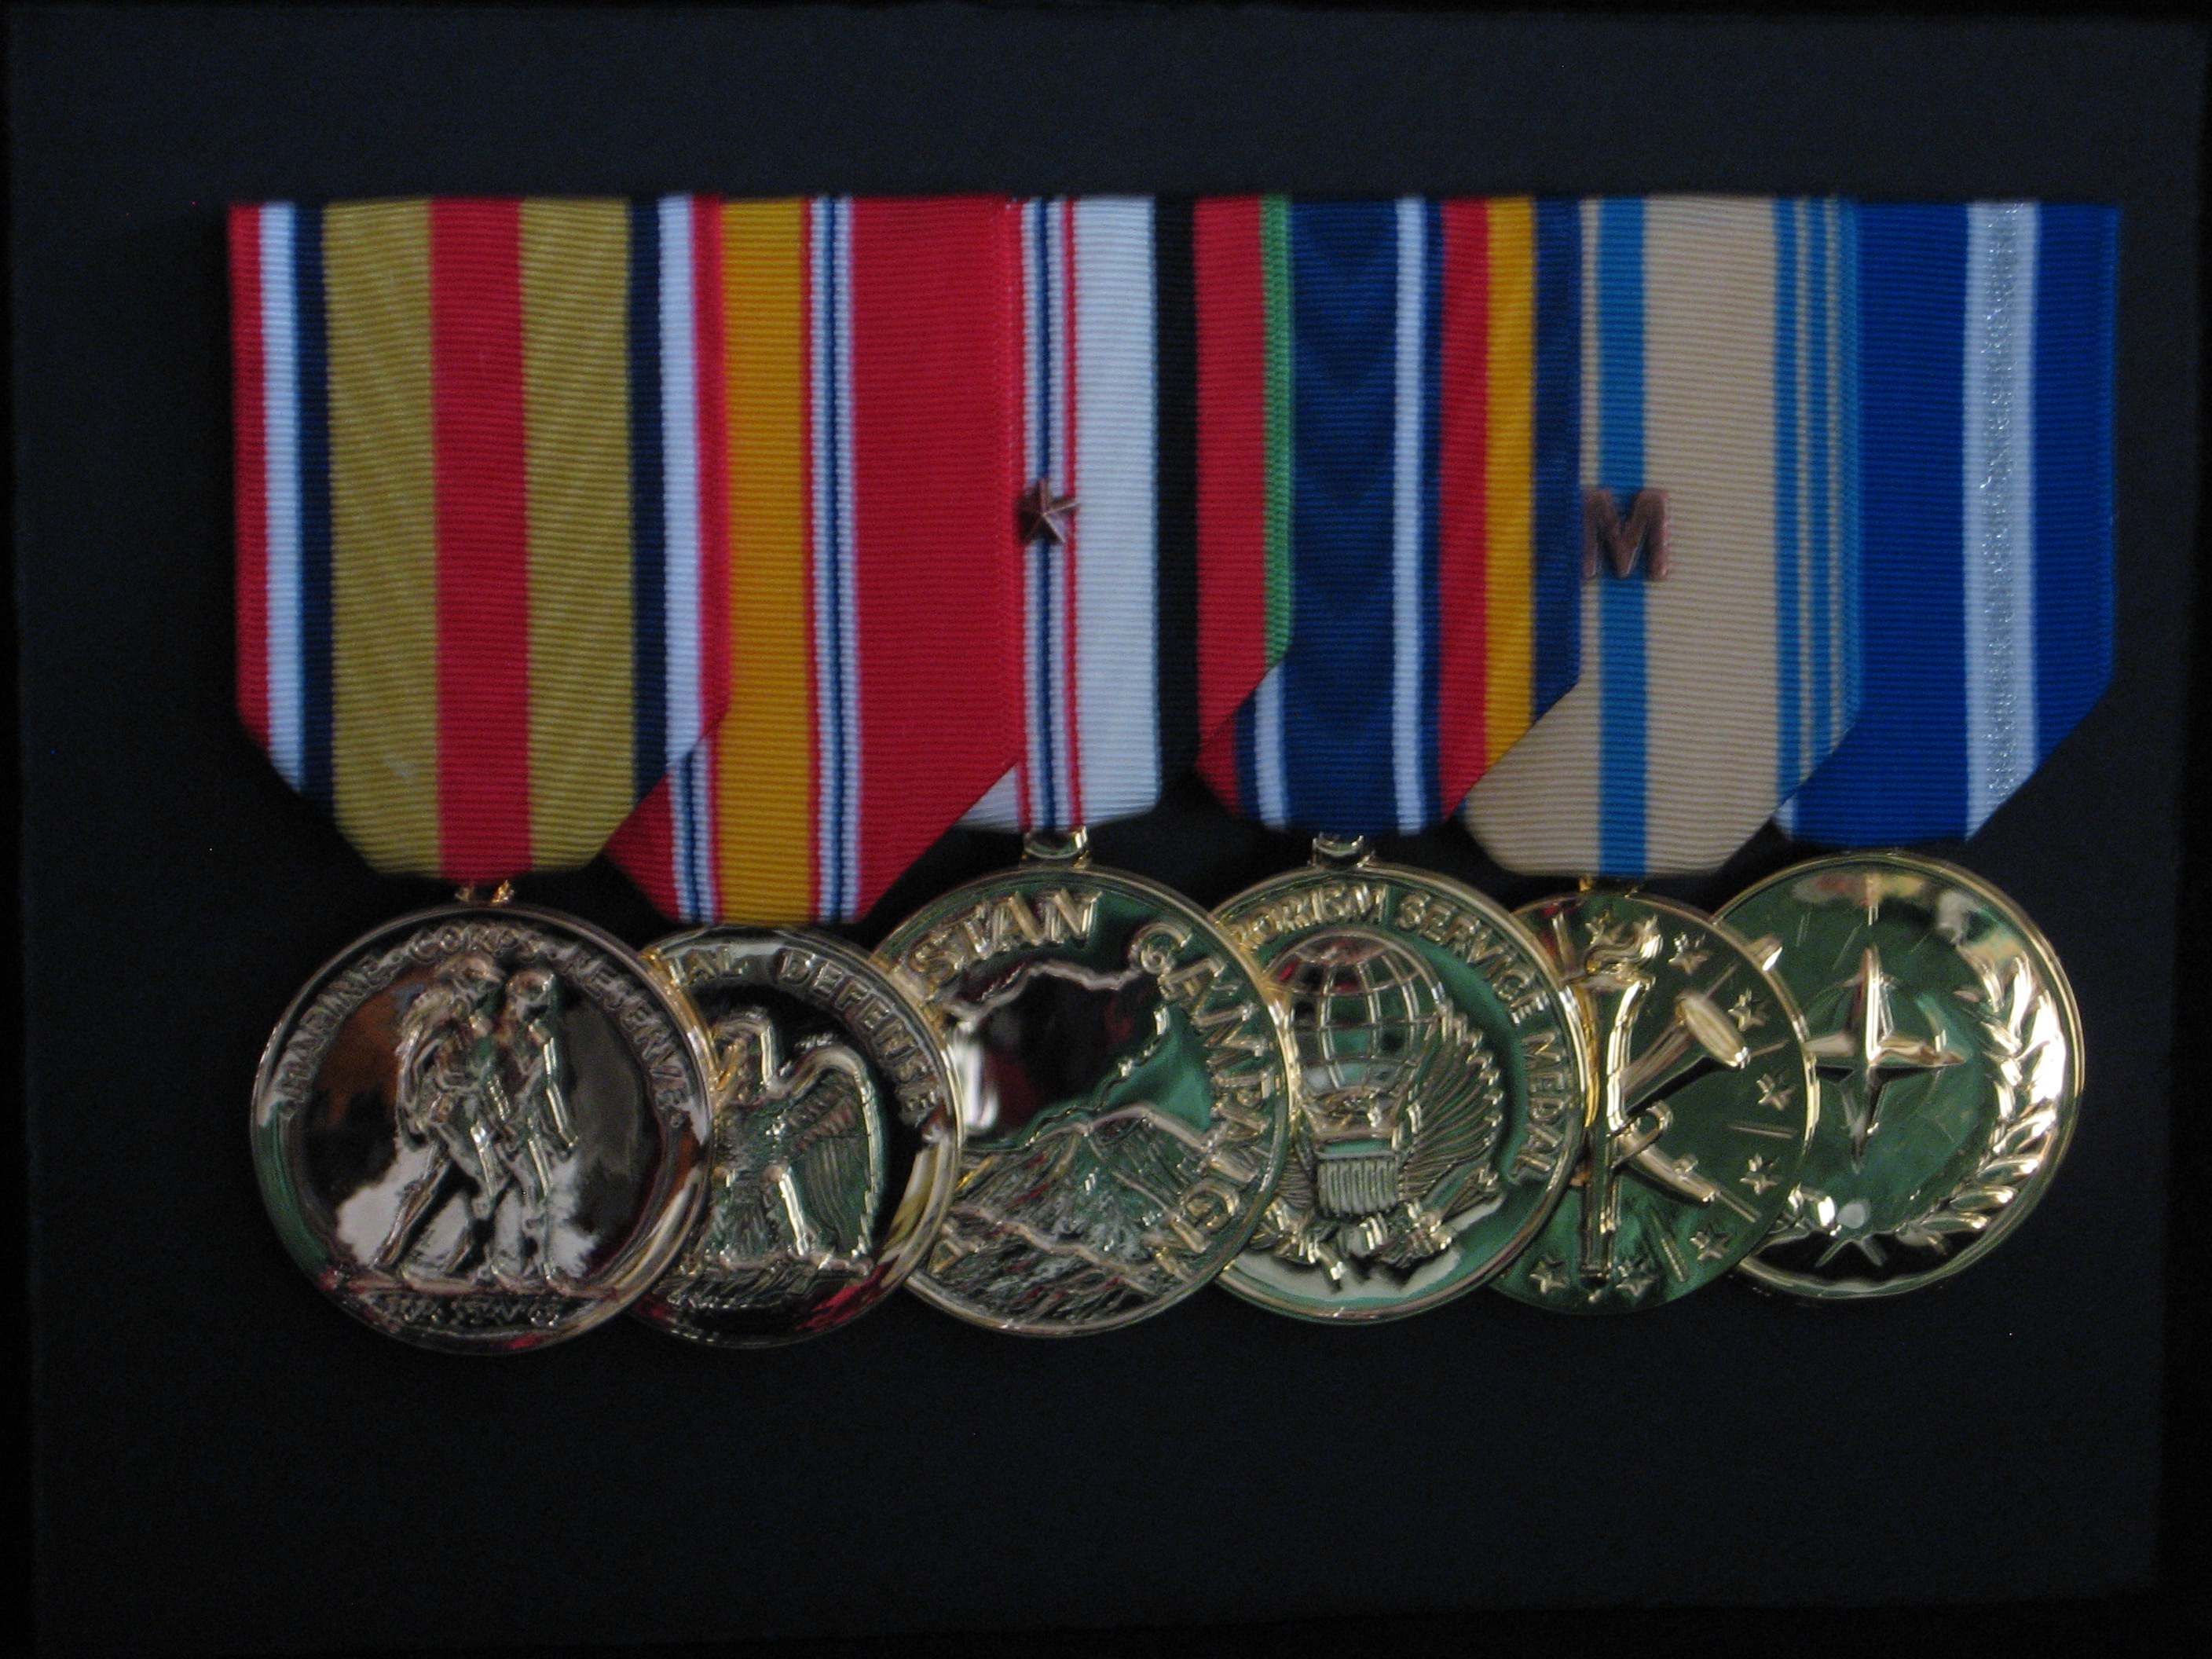 A superb medal mounting and framing completed by us for one of our